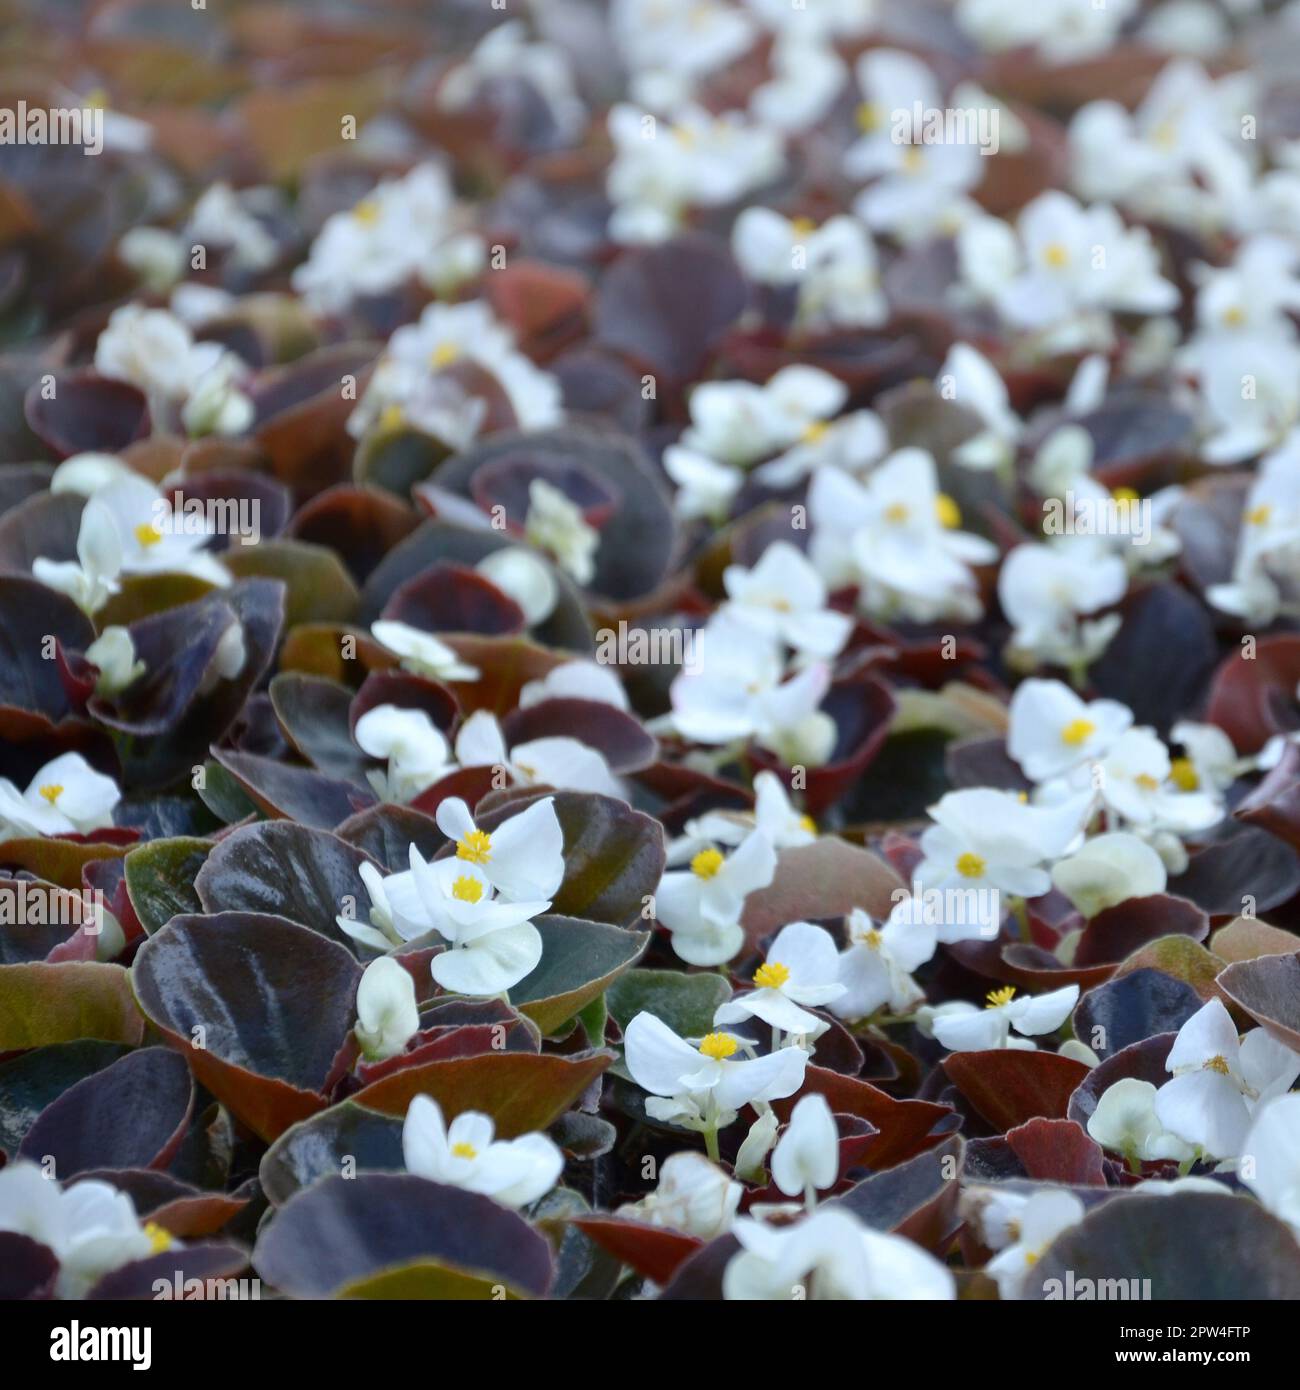 White Begonia cucullata also known as wax begonia and clubed begonia. Field with small white flowers garden close up Stock Photo